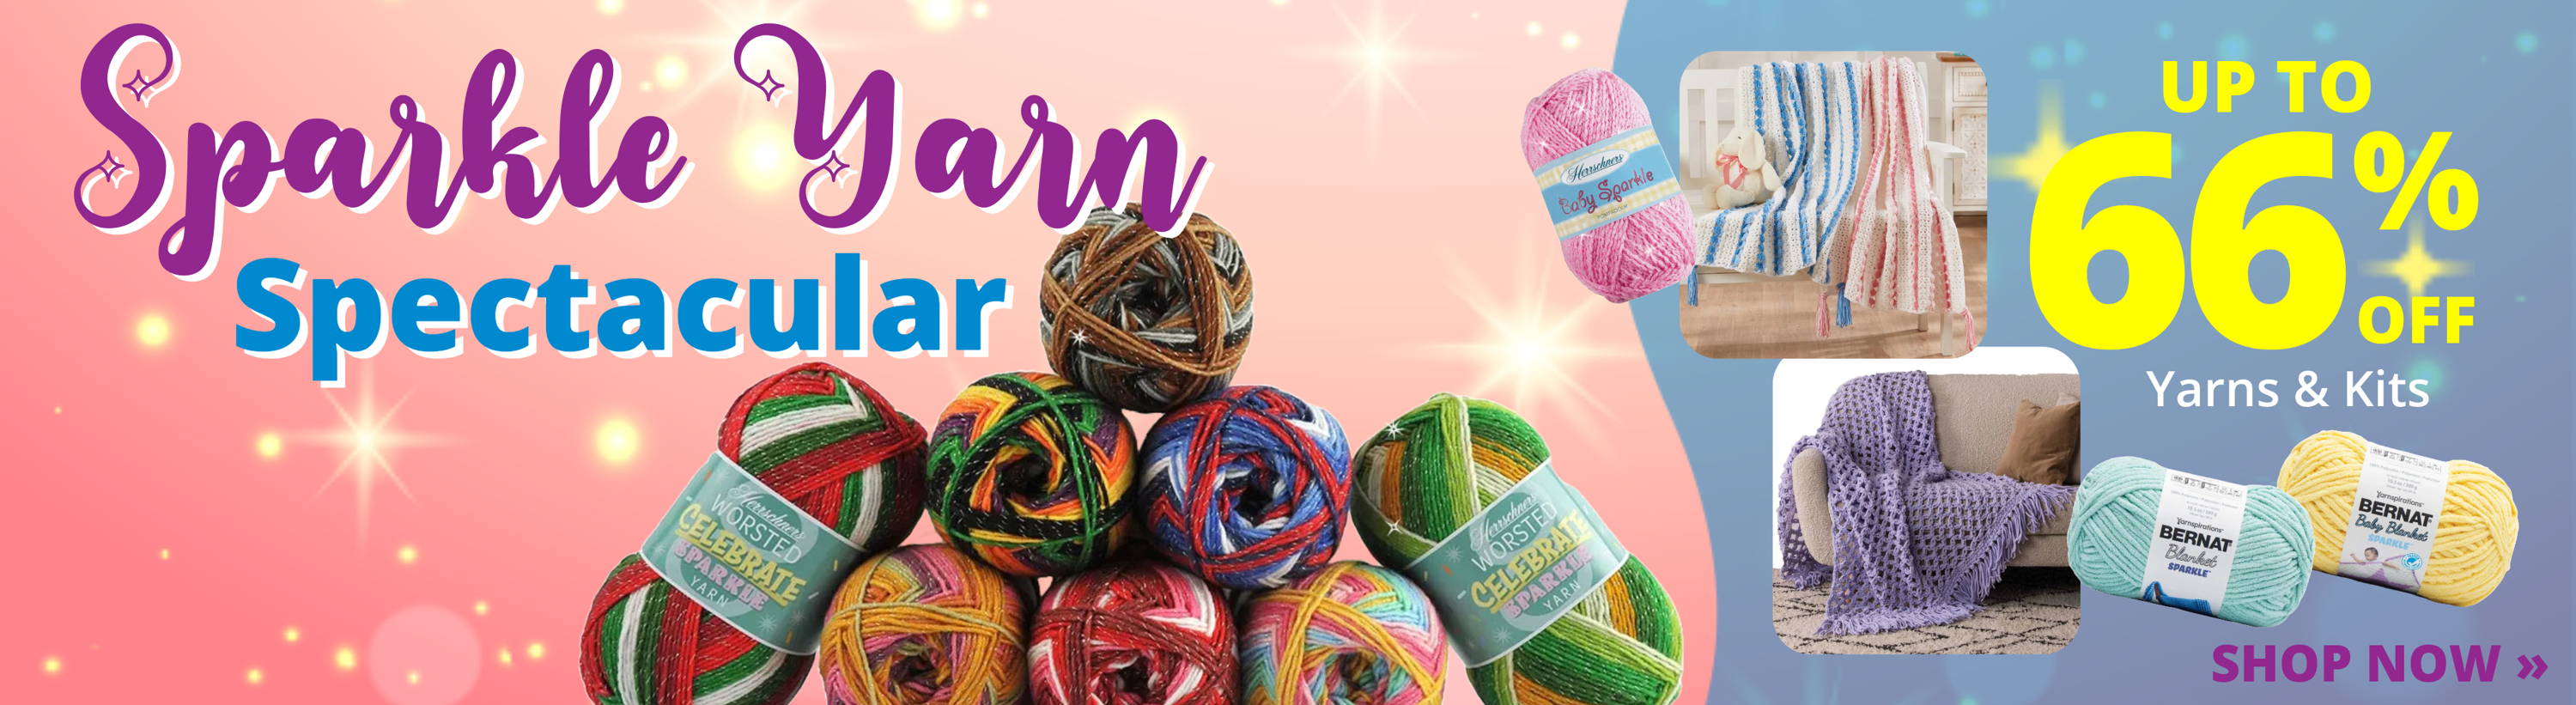 Sparkle Yarn Spectacular! Up to 66% off Yarns & Kits.